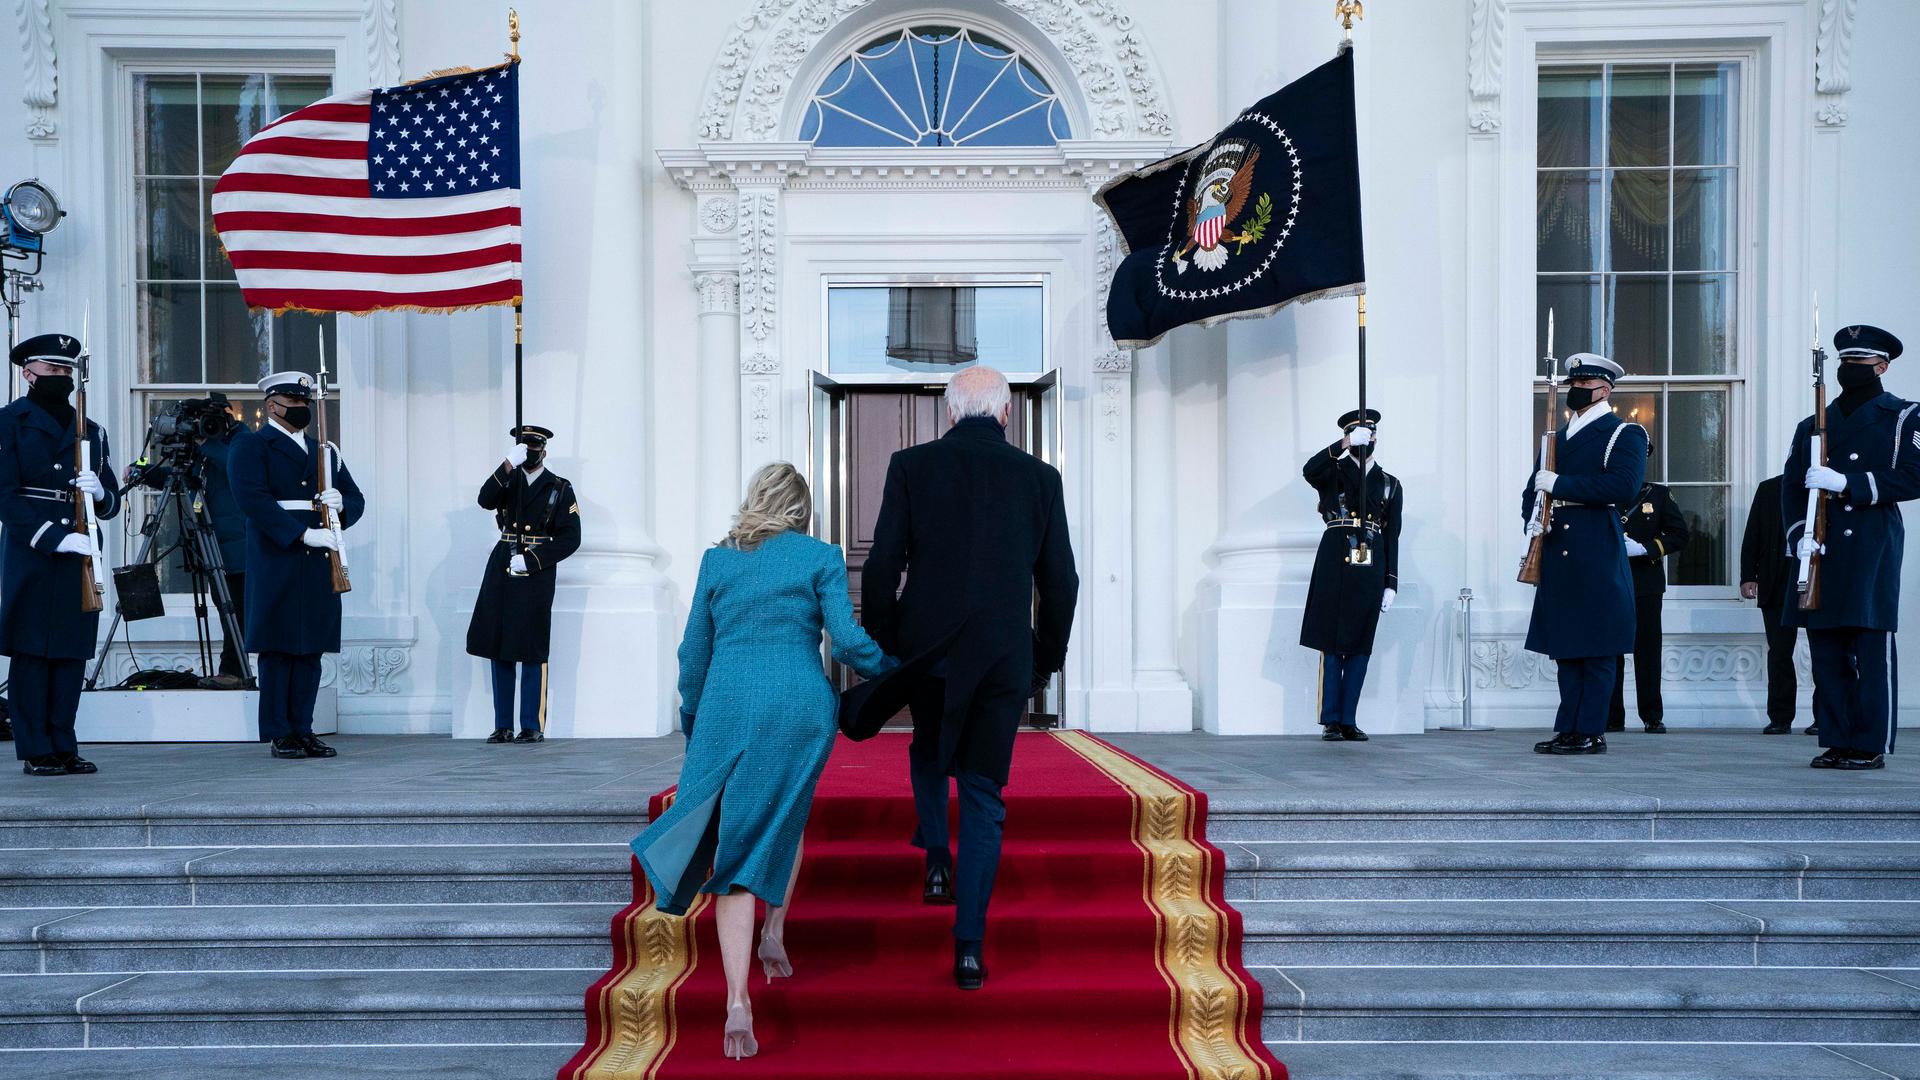 President Joe Biden and first lady Jill Biden arrive at the North Portico of the White House,  Jan. 20, 2021, in Washington, DC.